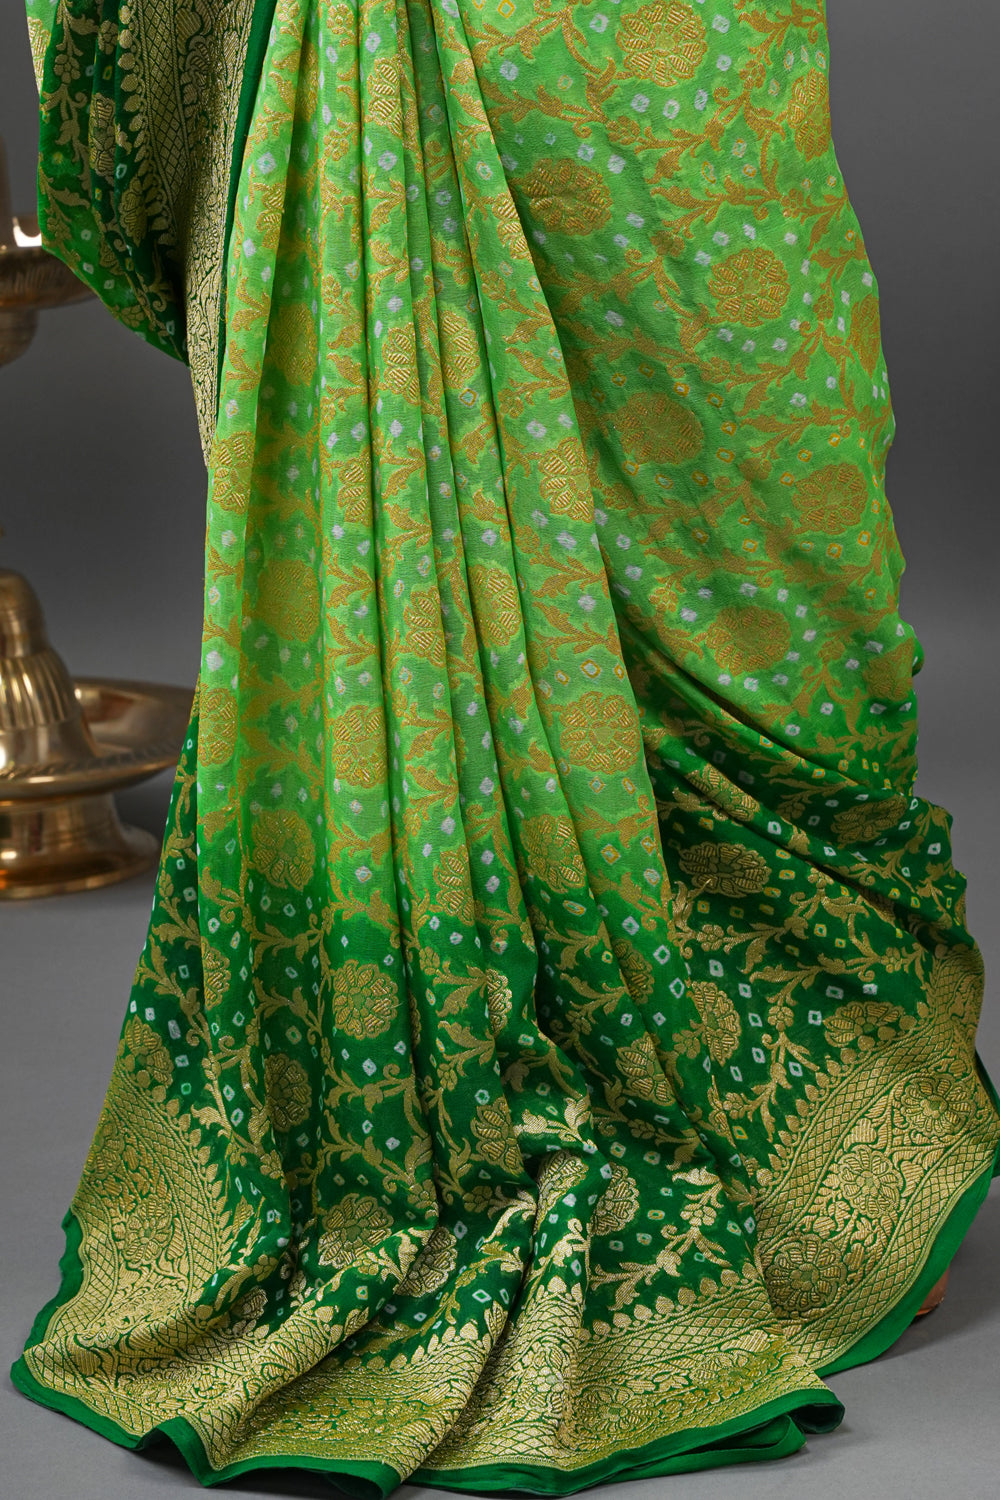 Authentic Hand Bandhej Banarasi Silk Georgette Saree in Ombre shades of Green | SILK MARK CERTIFIED